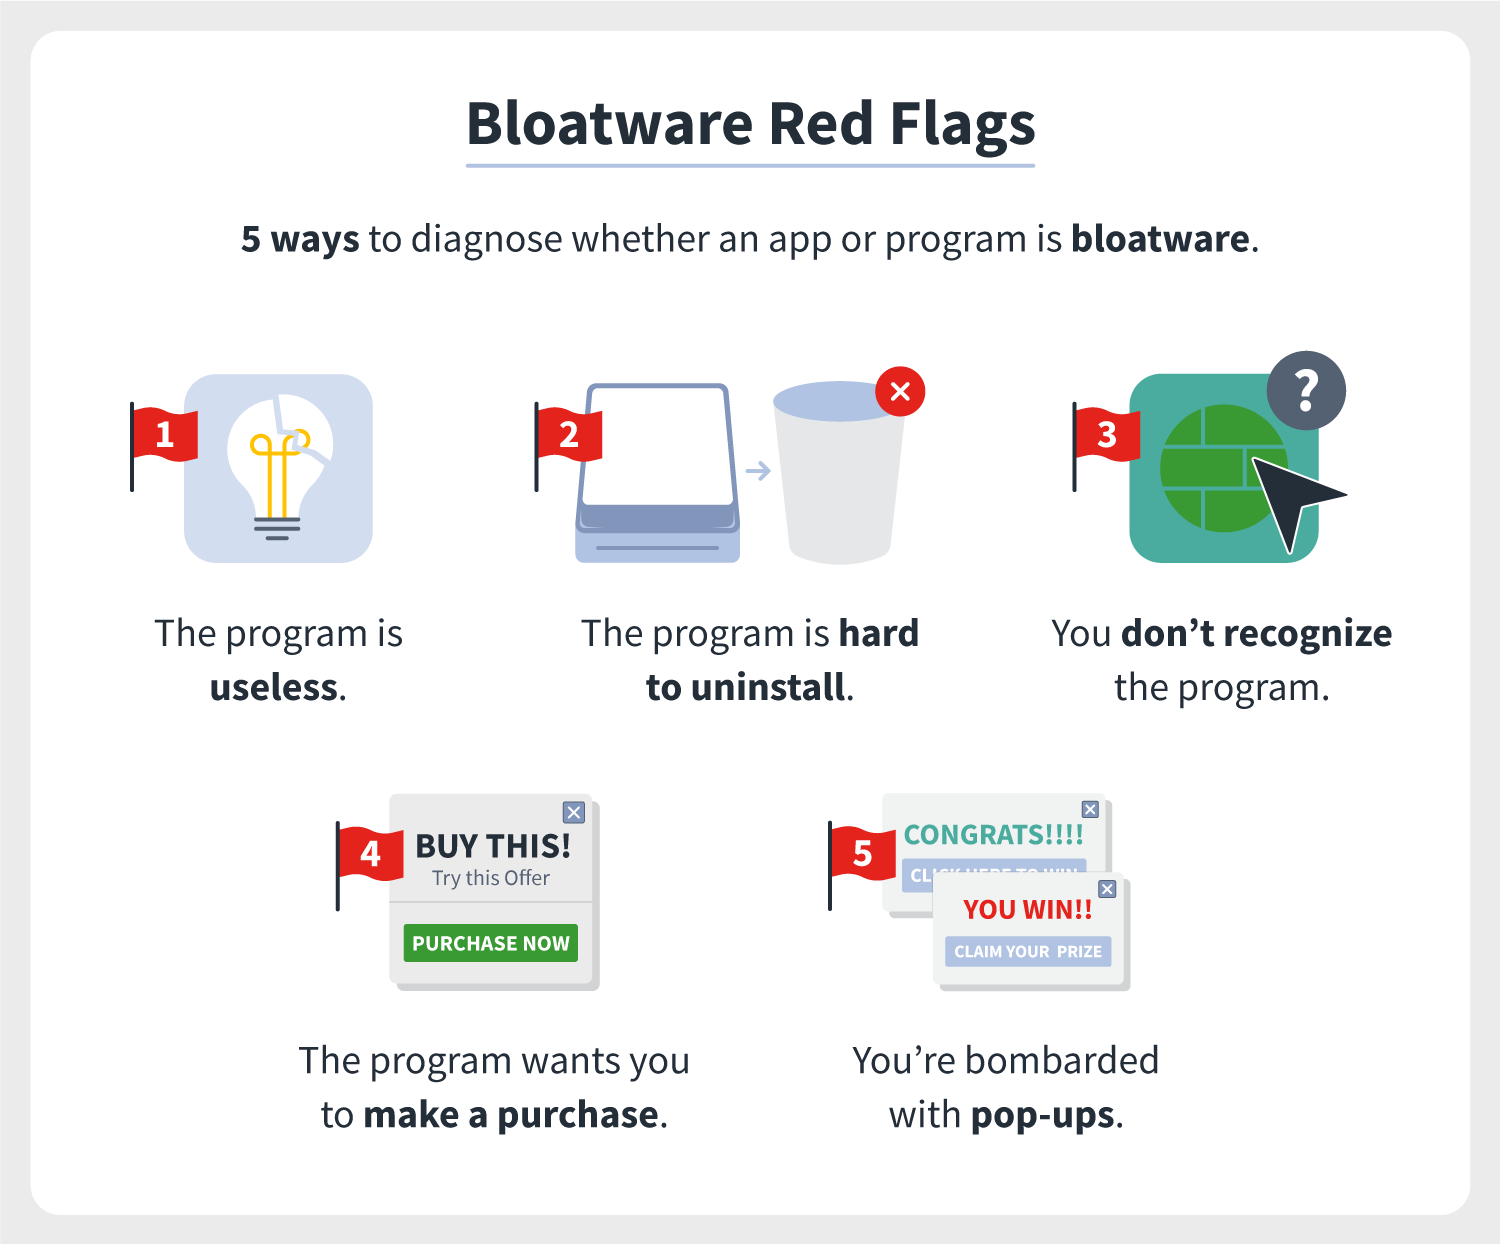 an overview of bloatware red flags to watch for on new devices, including useless programs, hard to uninstall programs, pop-ups, and unrecognizable programs